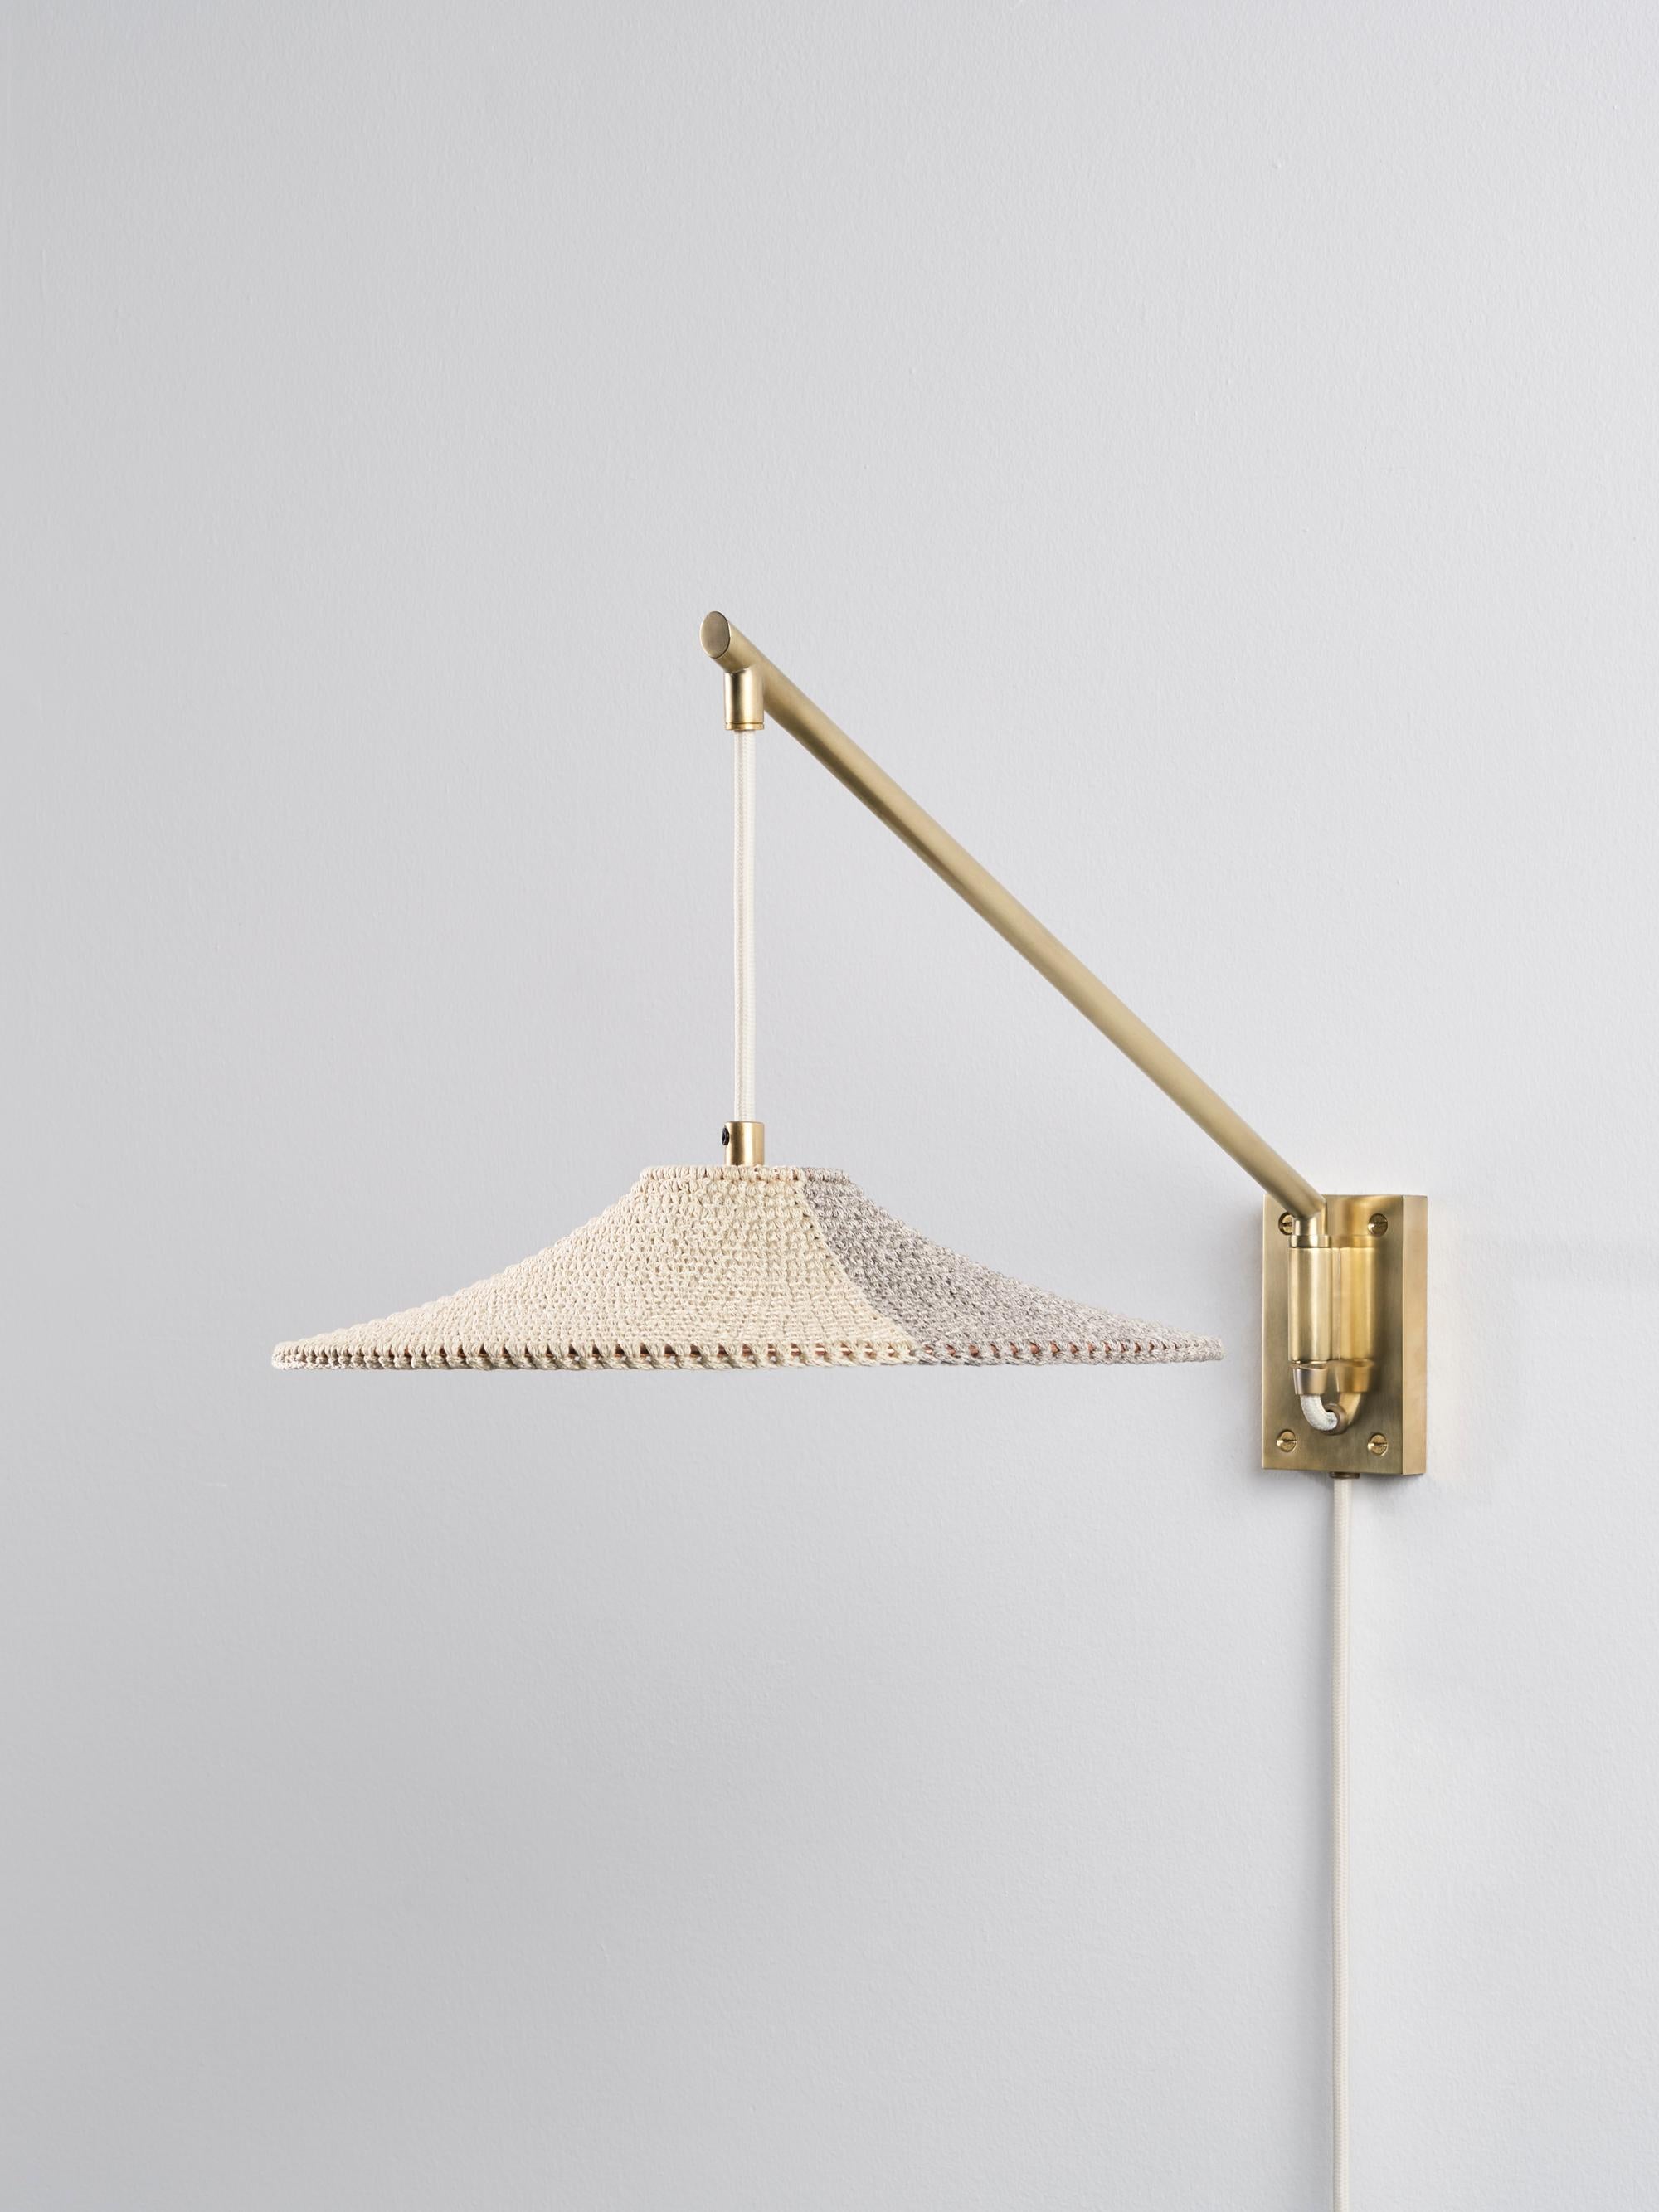 Small simple shade 01 50/50 wall lamp by Naomi Paul
Dimensions: D 30 x W 50 x H 27 cm
Materials: Metal frame, Egyptian cotton cord.
Colors: Ecru and Down grey.
Available in other colors and in 2 sizes: D 30 x W 50, D50 x W 102 cm.
Available in